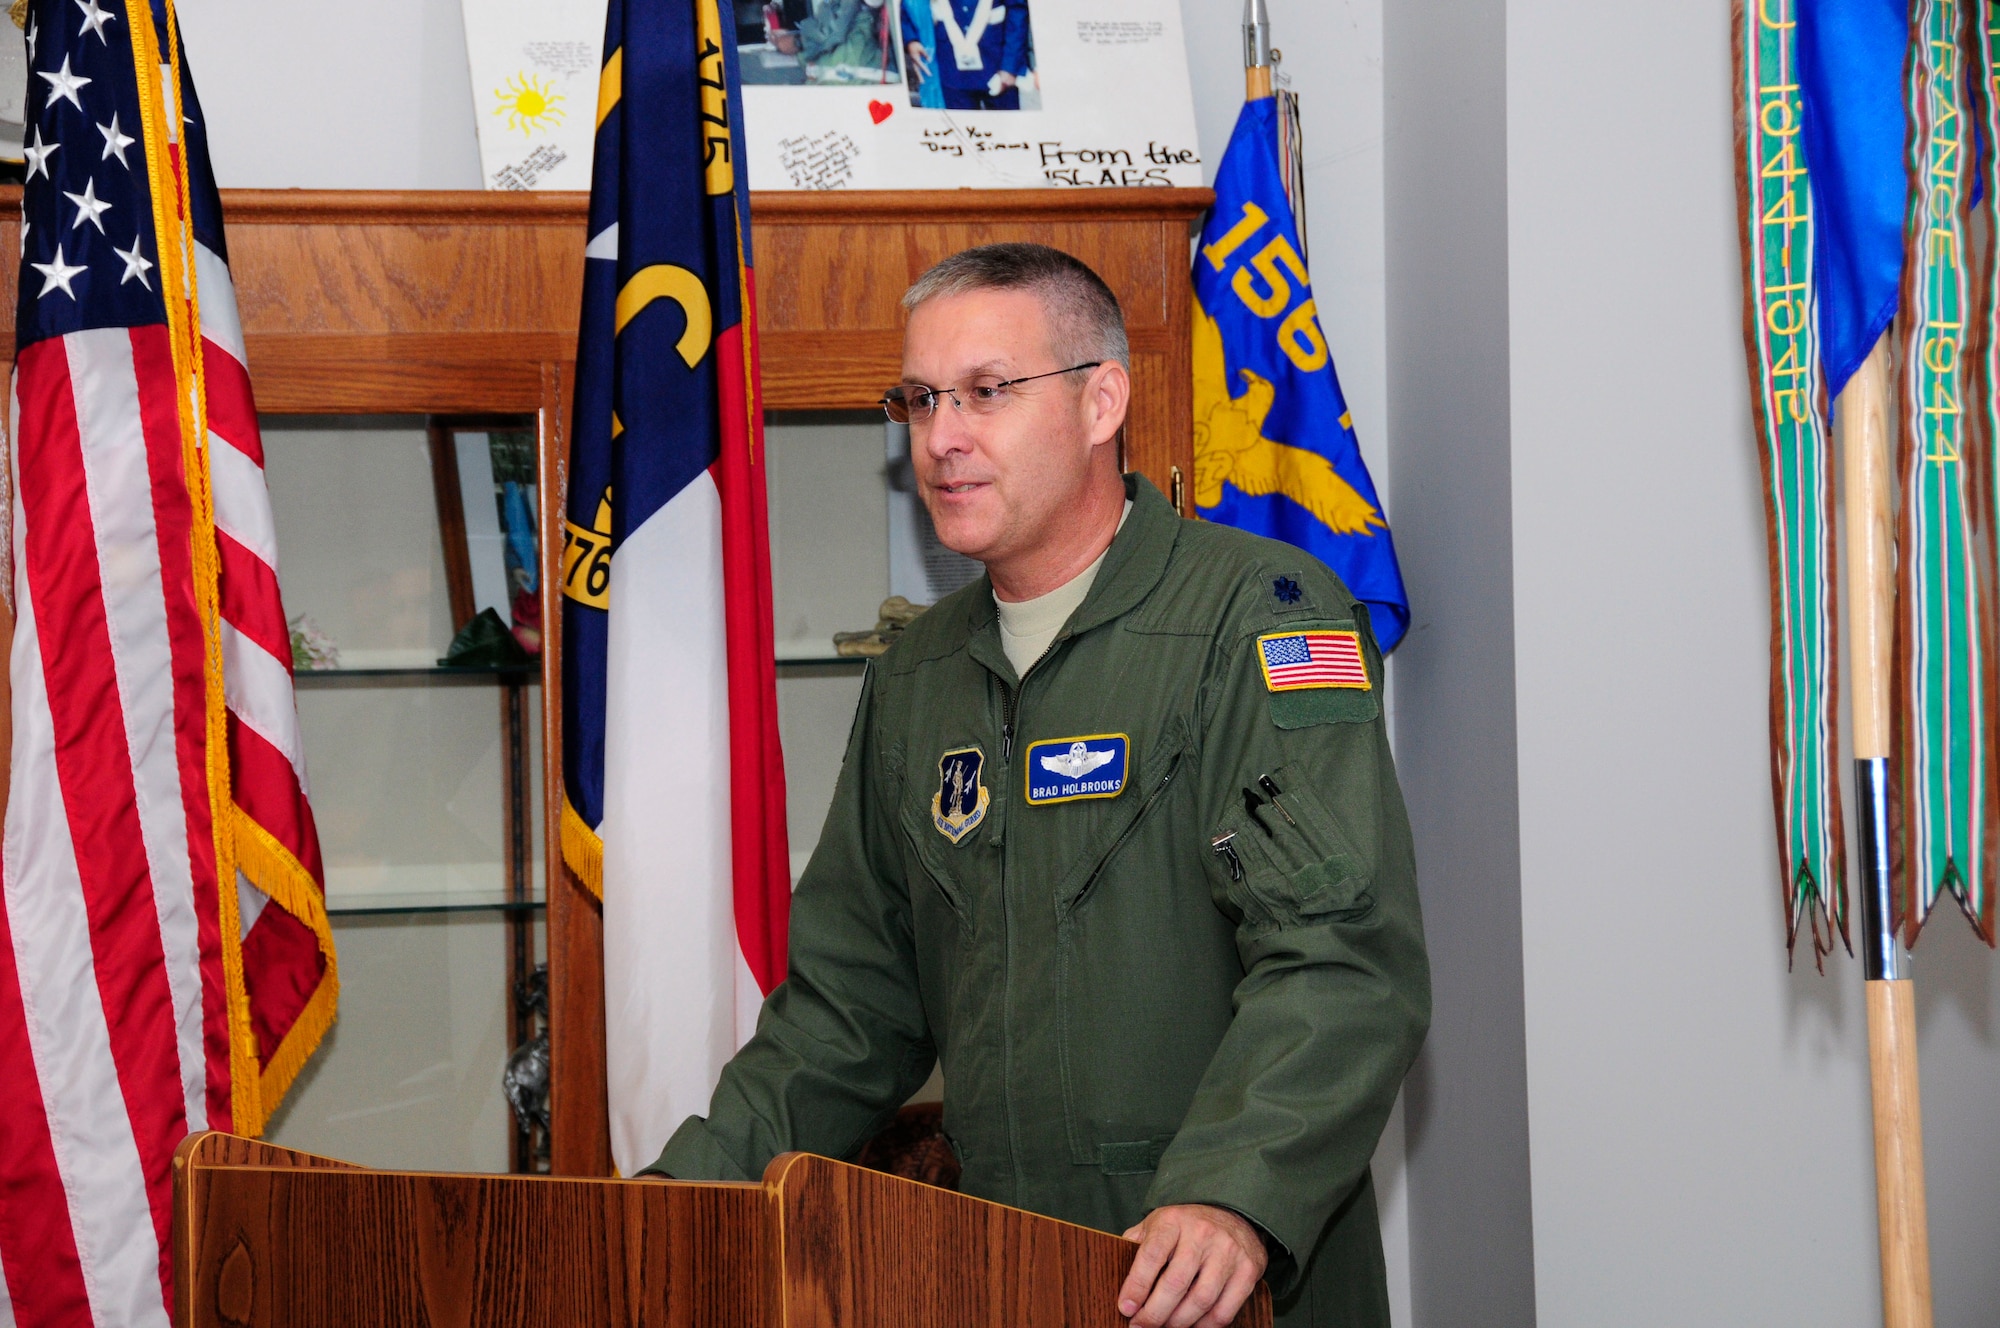 U.S. Air Force Lt. Col. Bradley E. Holbrooks, speaks to members of the North Carolina Air National Guard for the first time as commander of the 145th Operations Support Squadron. Holbrooks took command during a change of command ceremony held at the North Carolina Air National Guard base, Charlotte Douglas International Airport, June 6, 2015. (U.S. Air National Guard photo by Master Sgt. Patricia F. Moran, 145th Public Affairs/Released) 